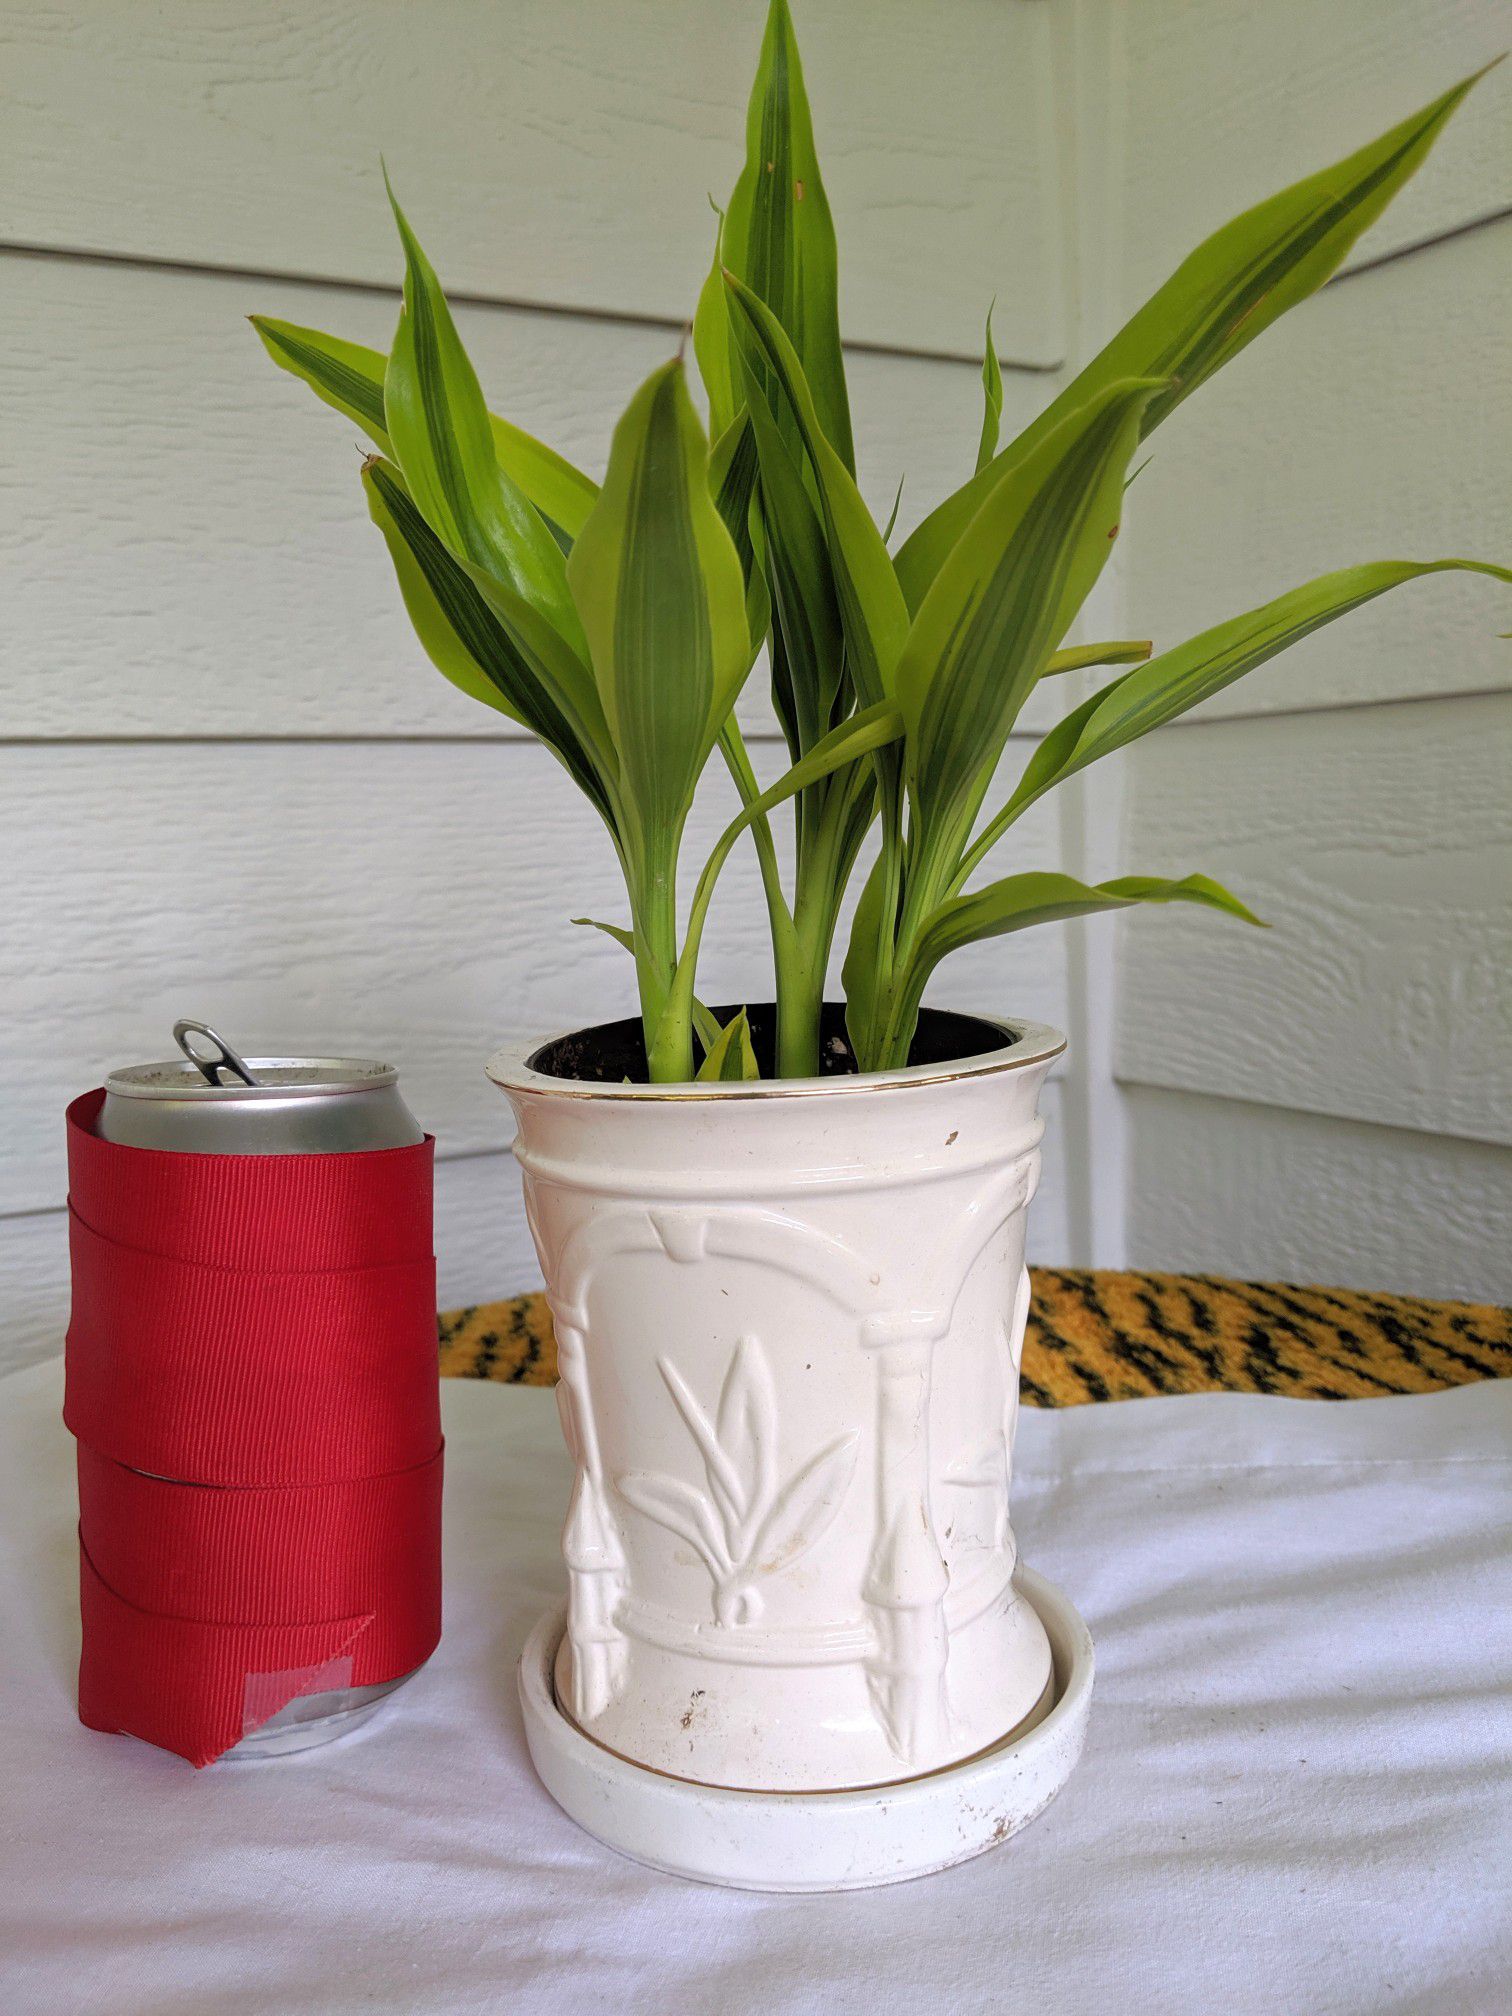 Variegated Dracaena Lucky Bamboo Plants in Ceramic Planter with Saucer-Real Indoor House Plant